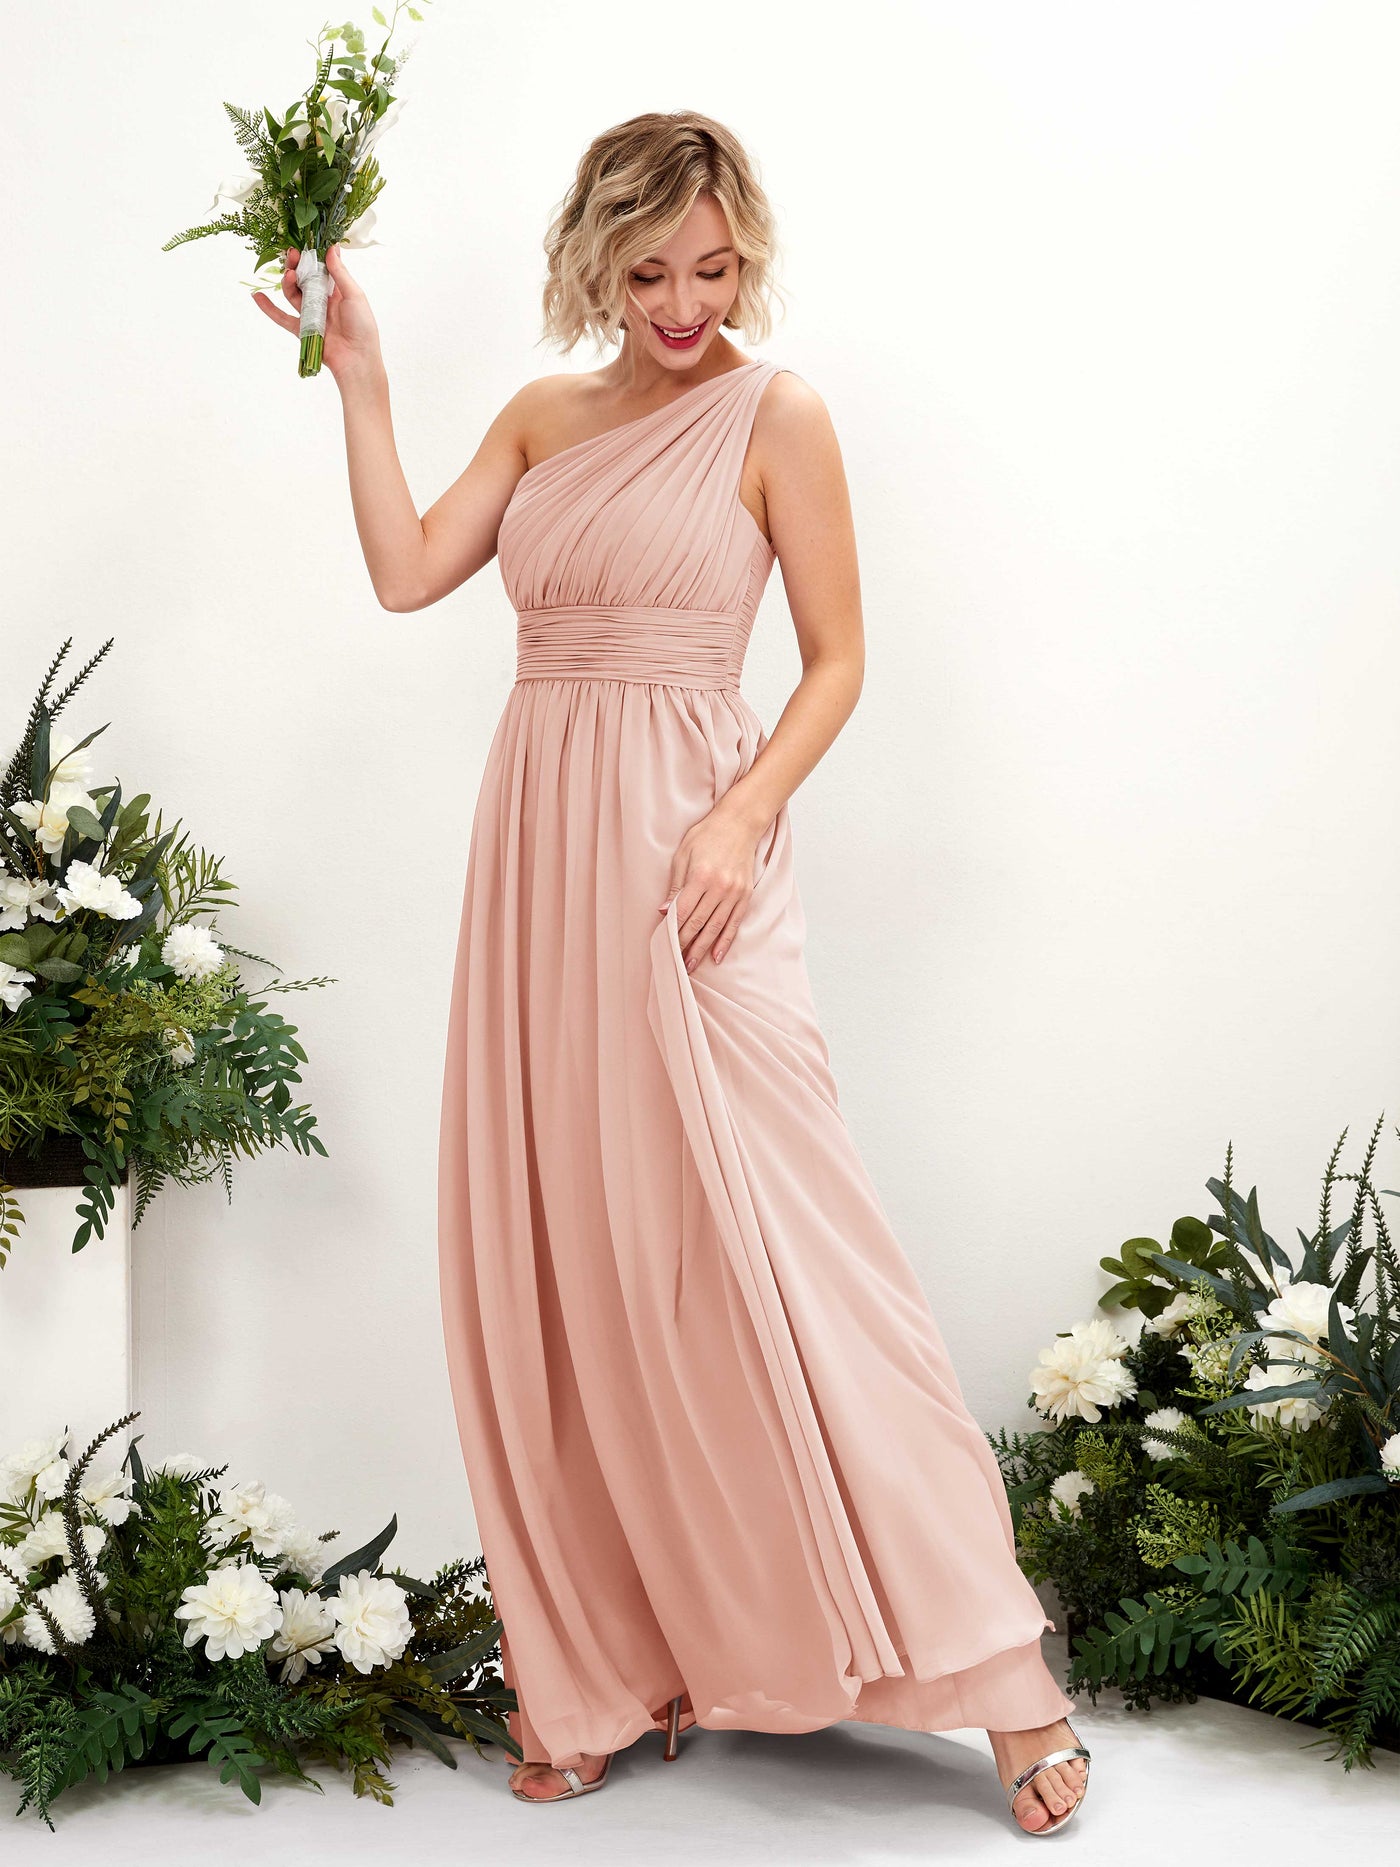 Pearl Pink Bridesmaid Dresses Bridesmaid Dress Ball Gown Chiffon One Shoulder Full Length Sleeveless Wedding Party Dress (81225008)#color_pearl-pink